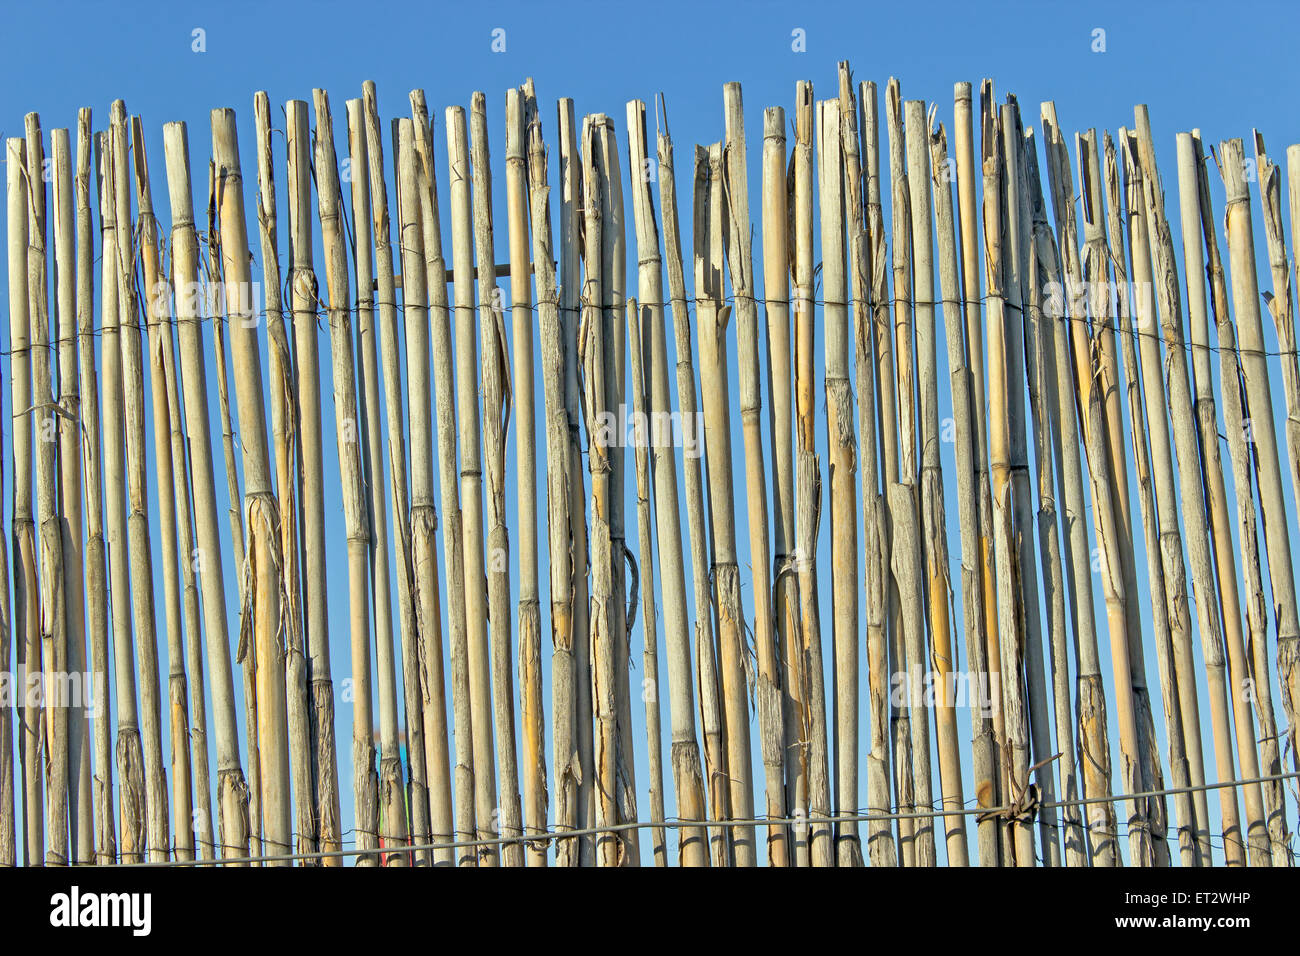 Old cane fence texture over blue sky Stock Photo